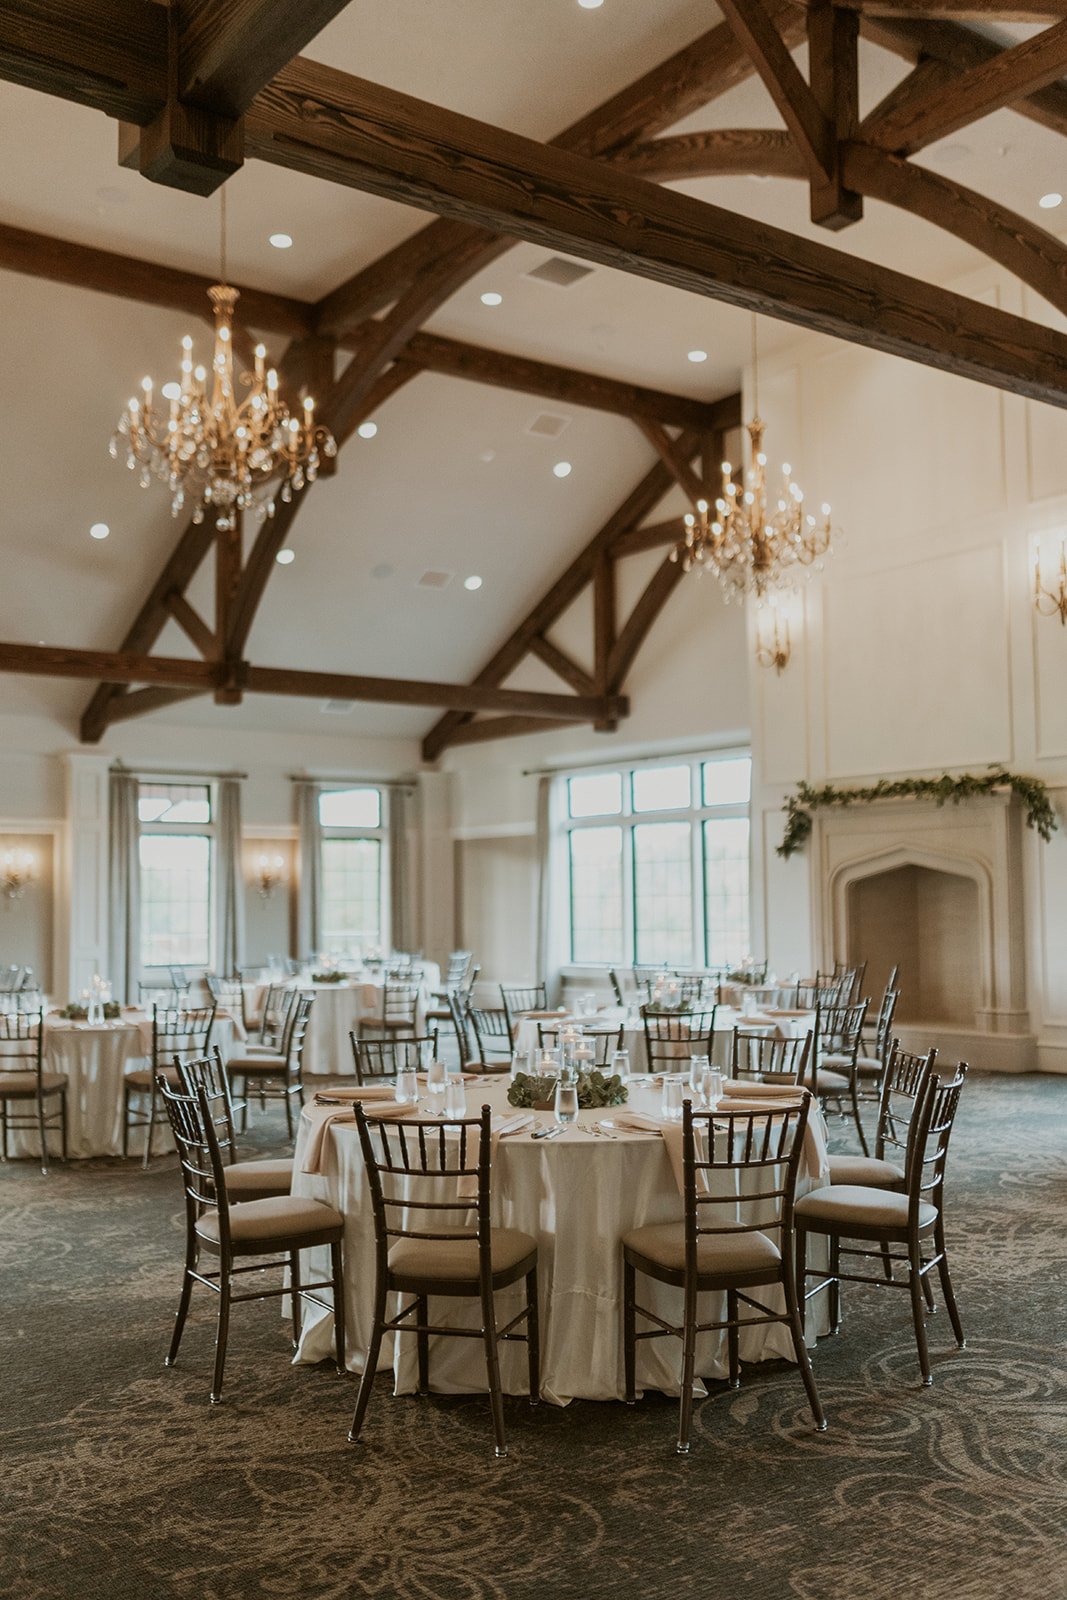 Timber Banks venue decorated with dark wood details, chandeliers, and white linen cover tables. 